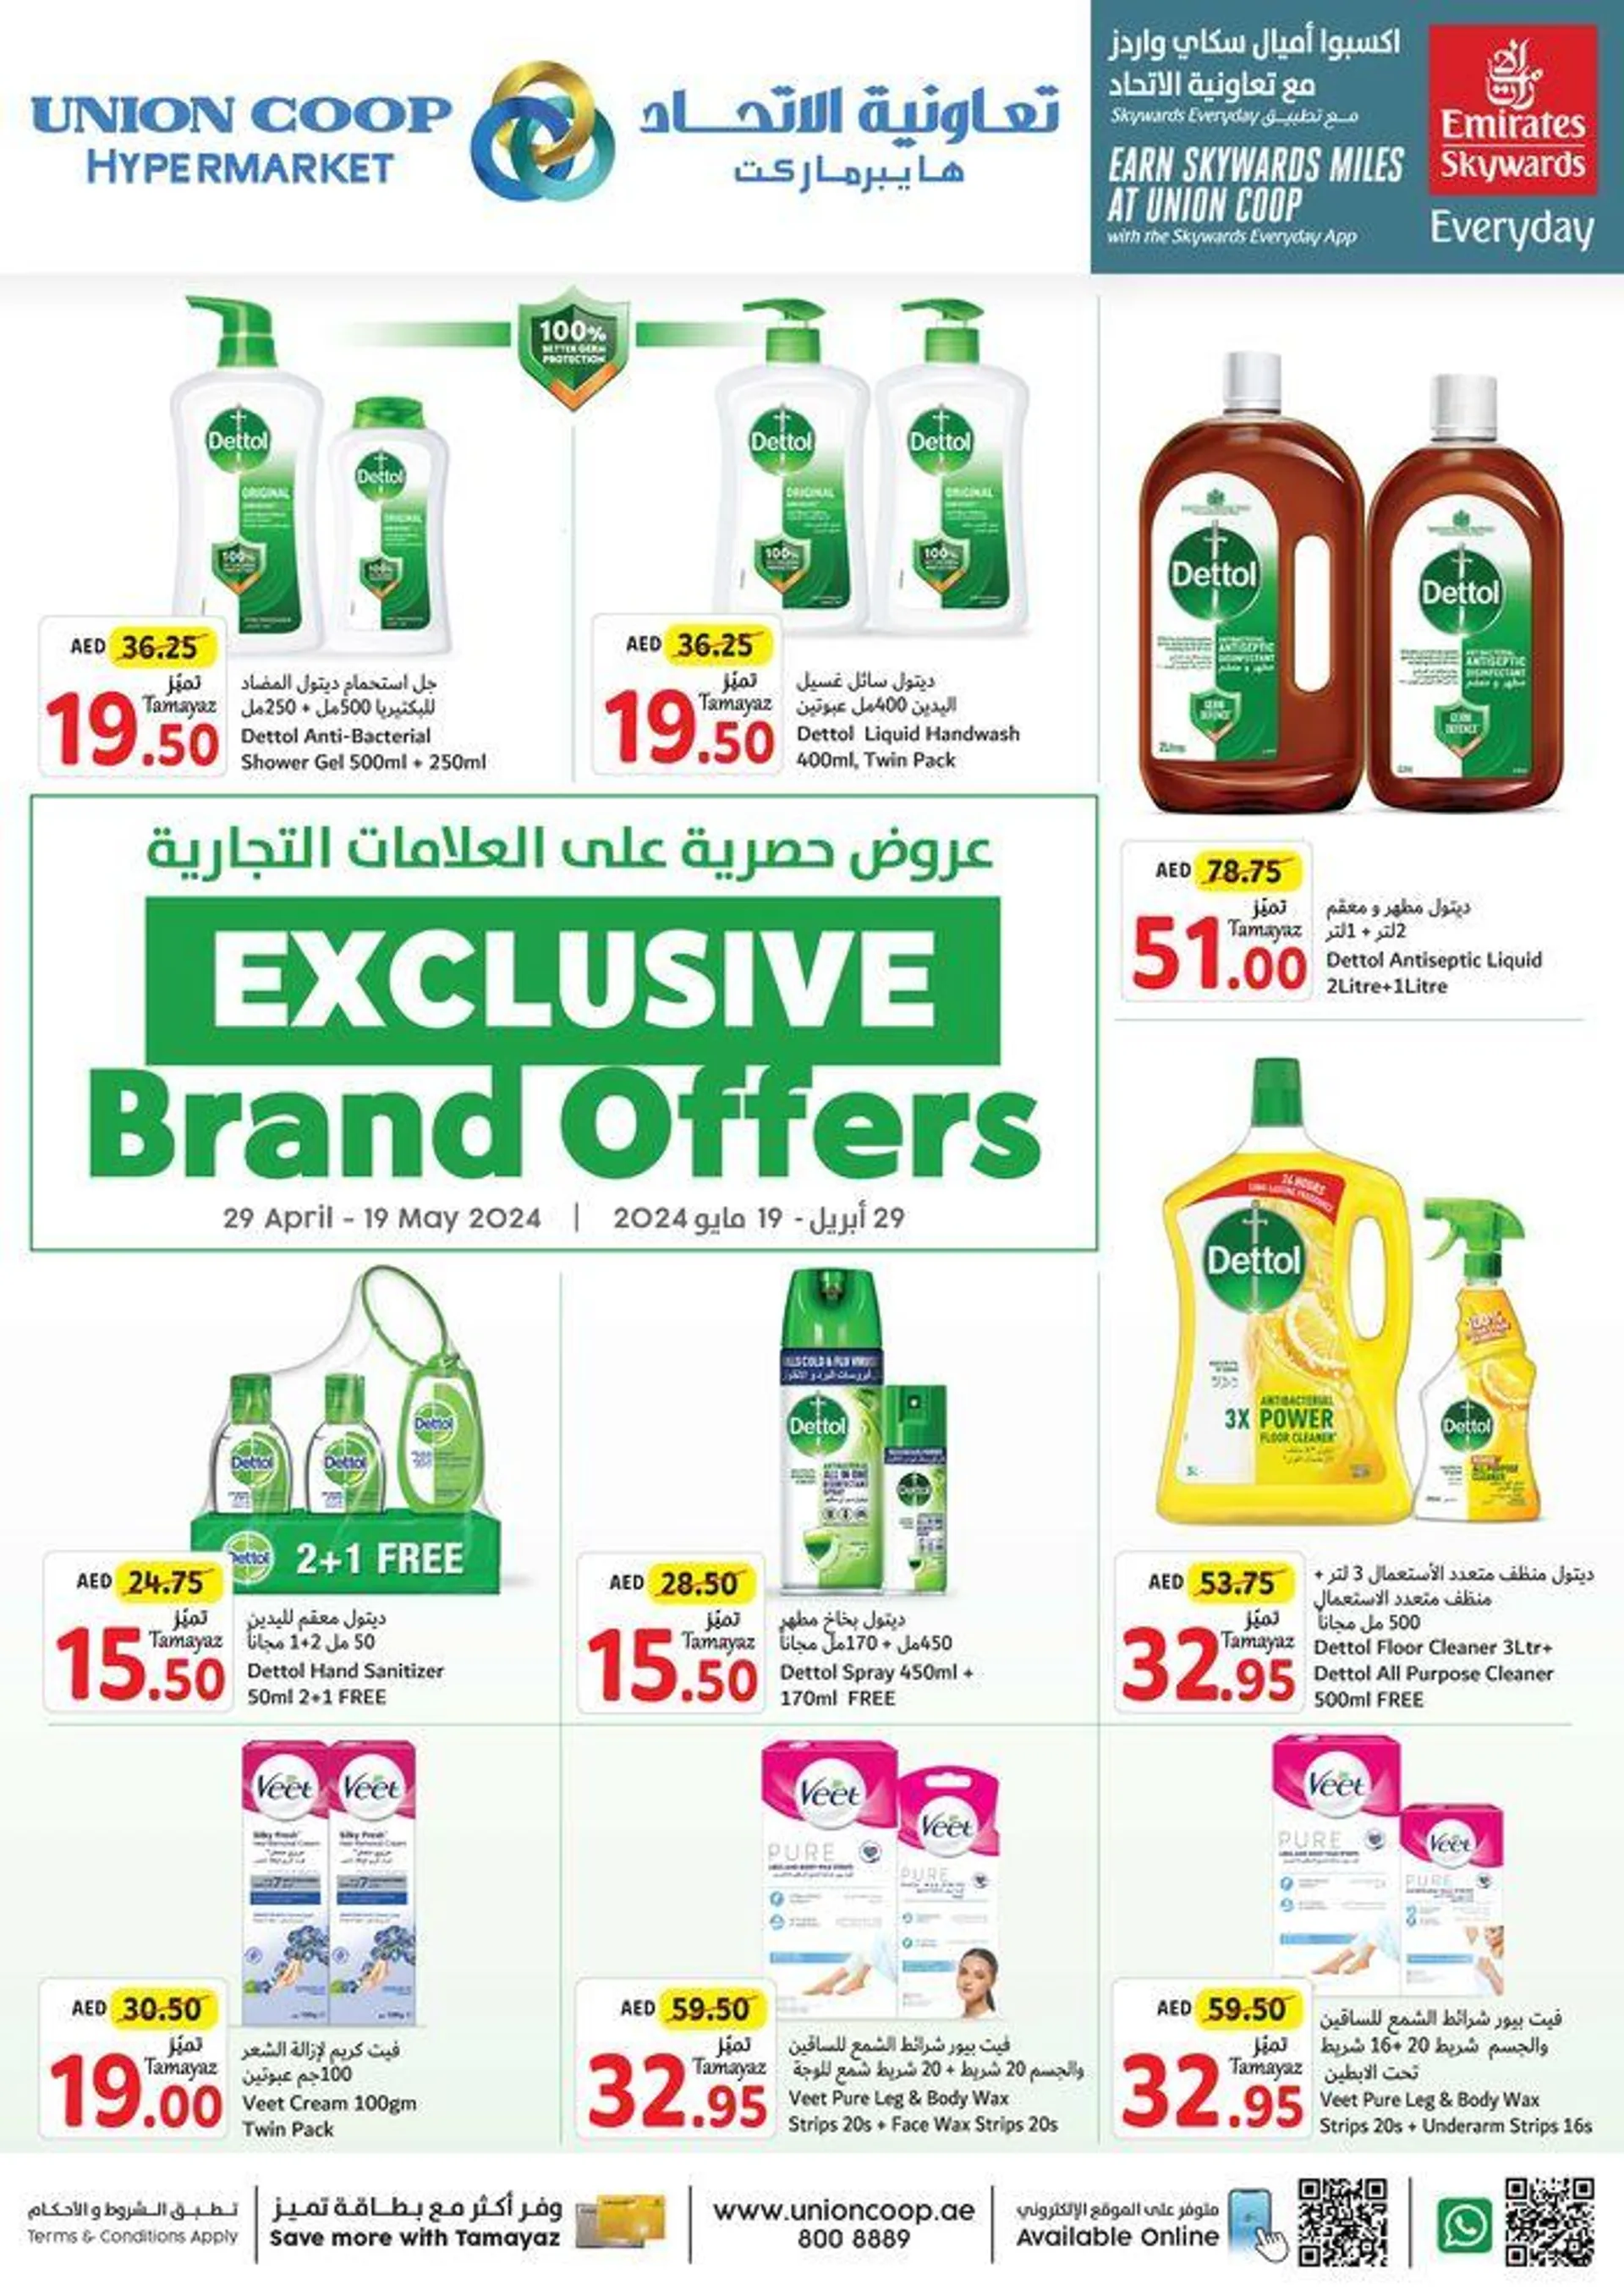 Exclusive Brand Offers! - 1